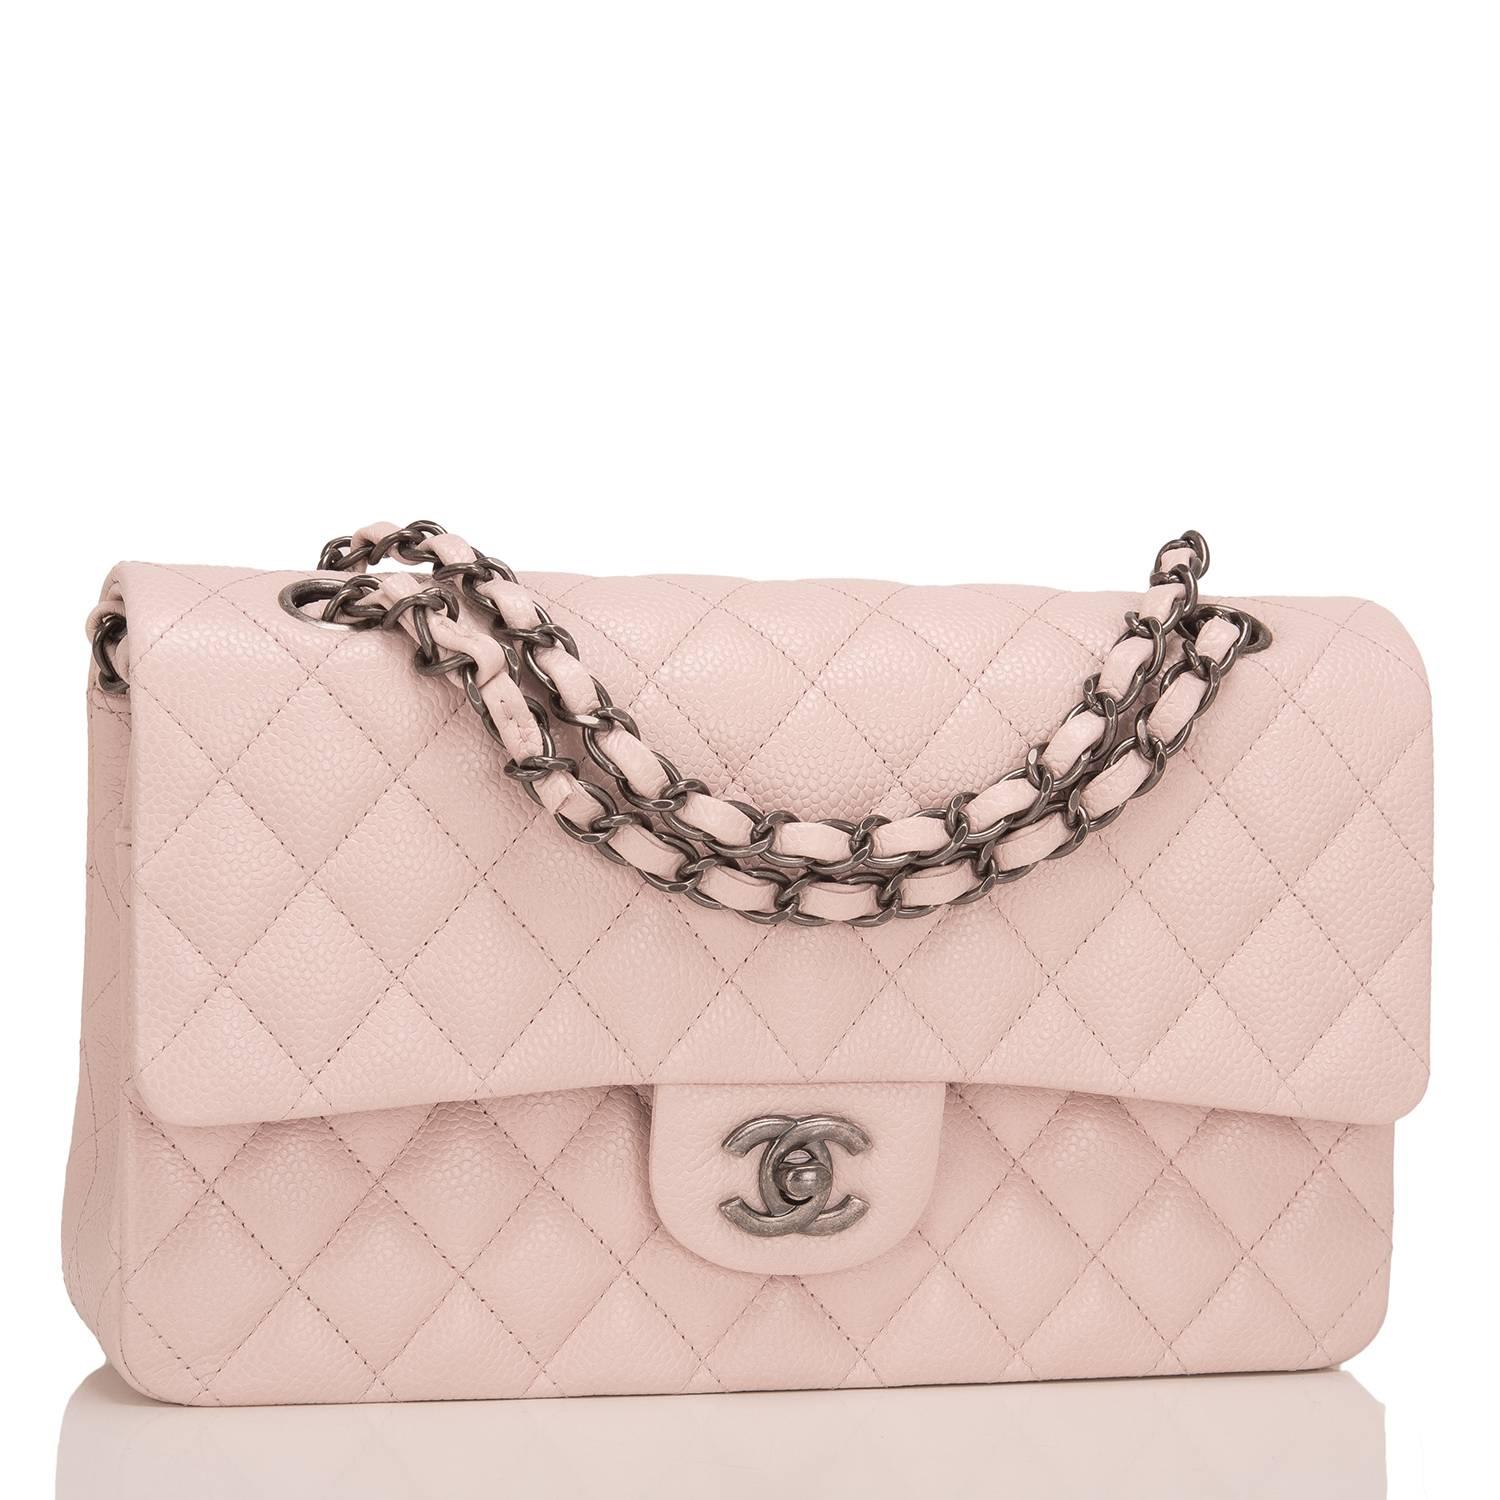 Chanel light pink Medium Classic Double Flap bag of quilted caviar leather accented with aged ruthenium hardware.

The bag features a front flap with signature CC turnlock closure, half moon back pocket and adjustable interwoven aged ruthenium